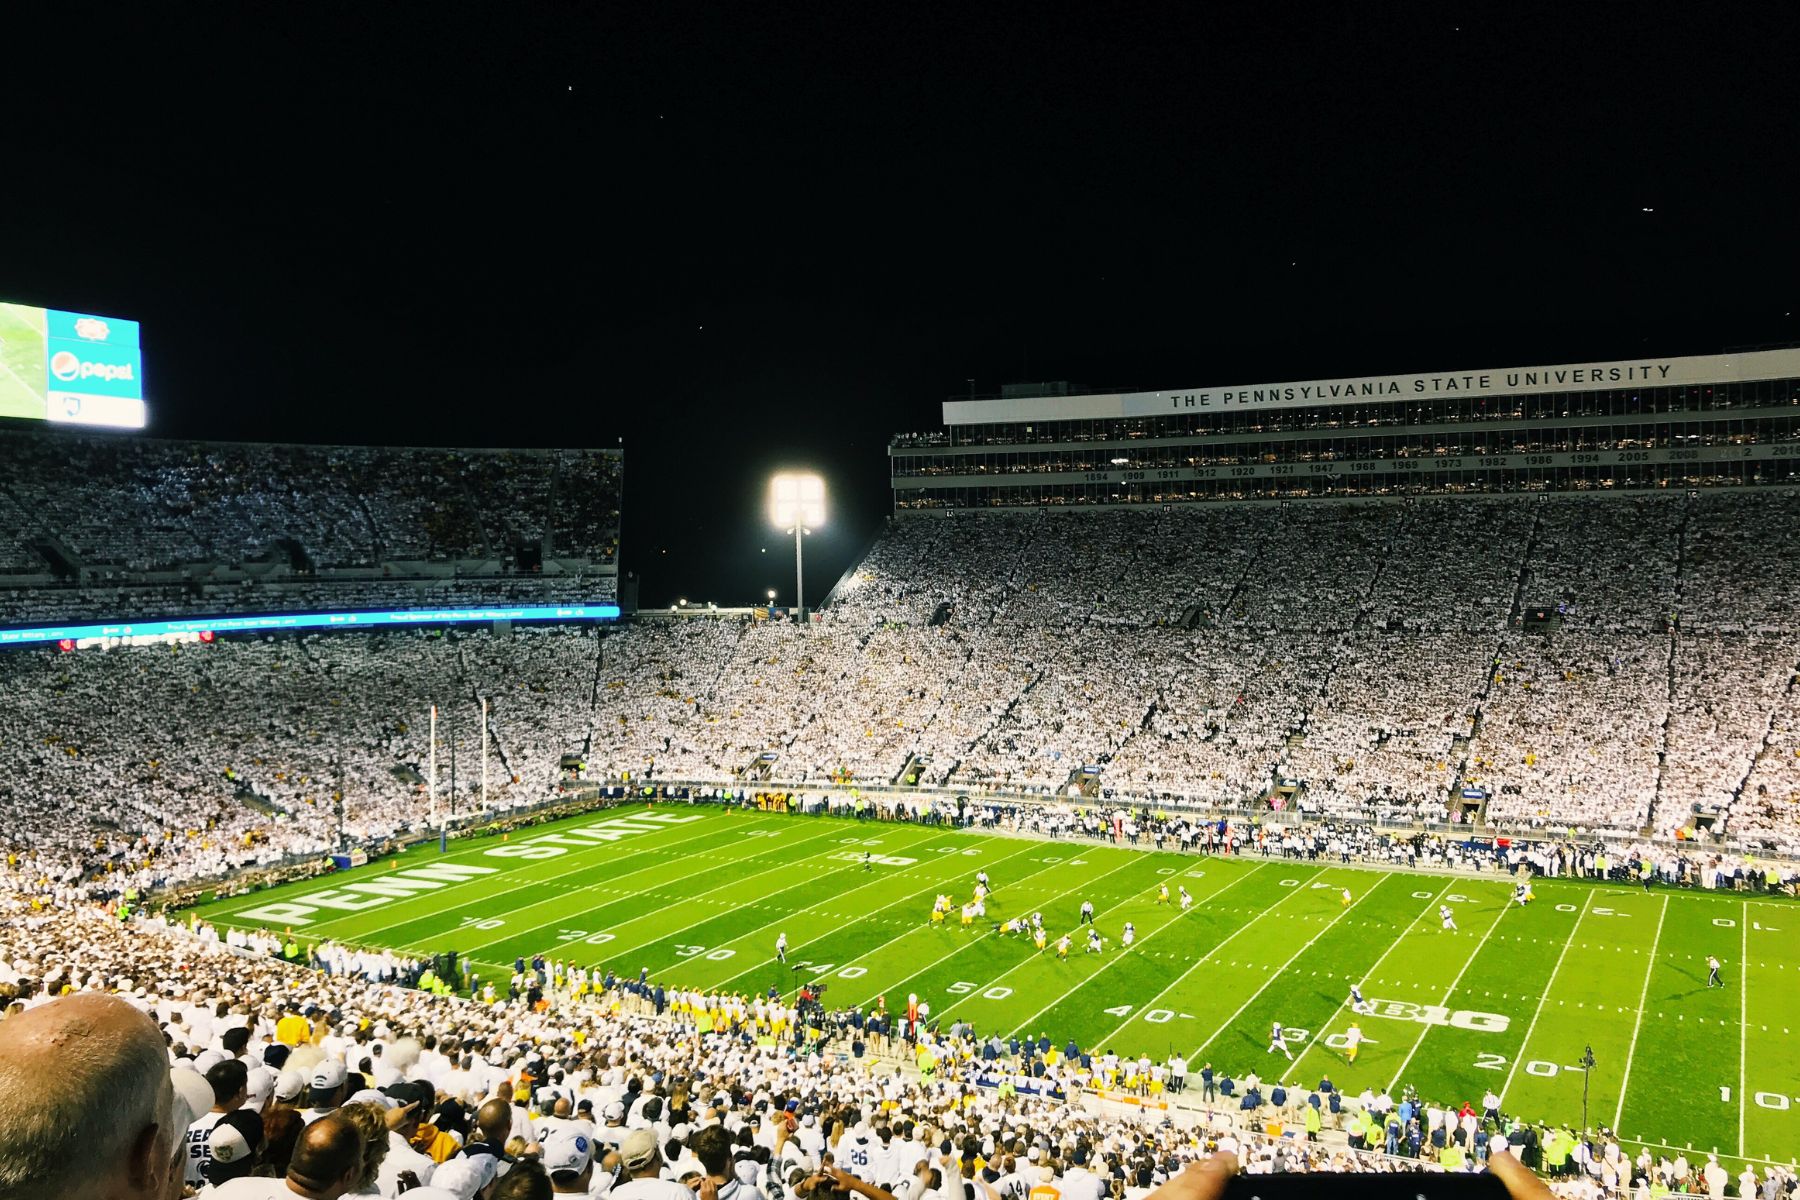 things to do in state college pa visit beaver stadium home of penn state football